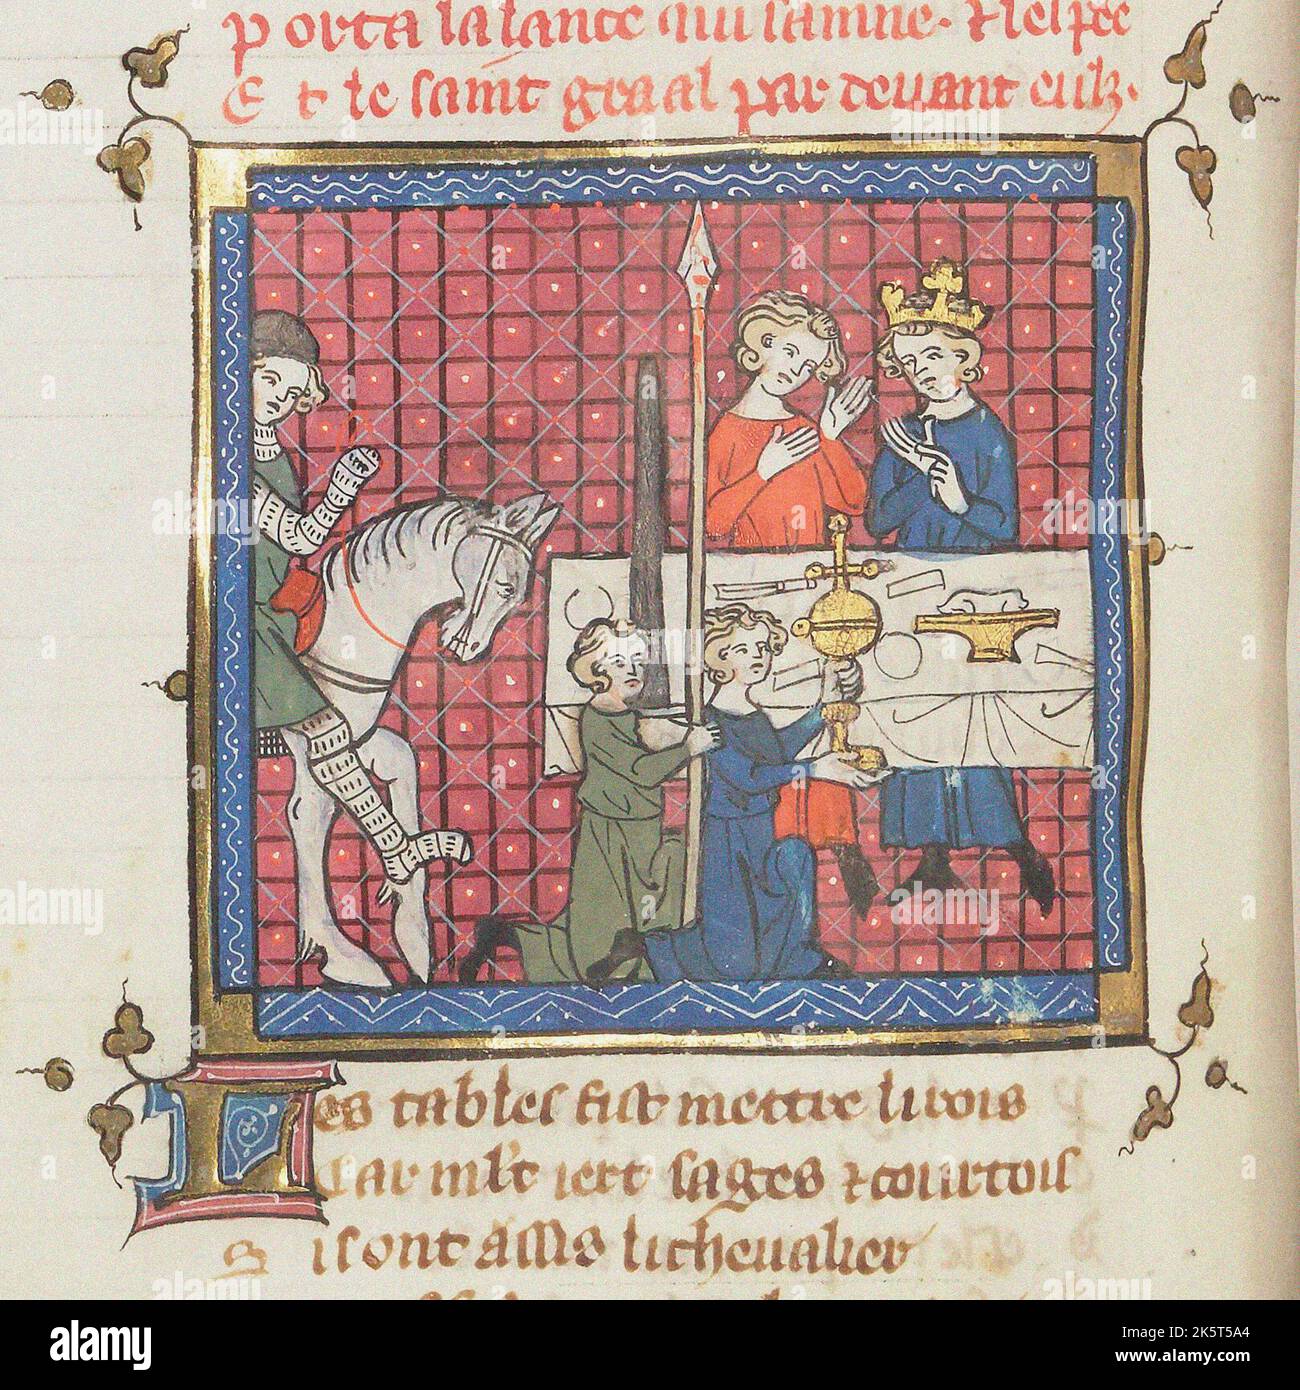 Procession du Saint Graal. From Roman de Perceval le Gallois et continuations, ca 1330. Found in the collection of the Biblioth&#xe8;que Nationale de France. Stock Photo